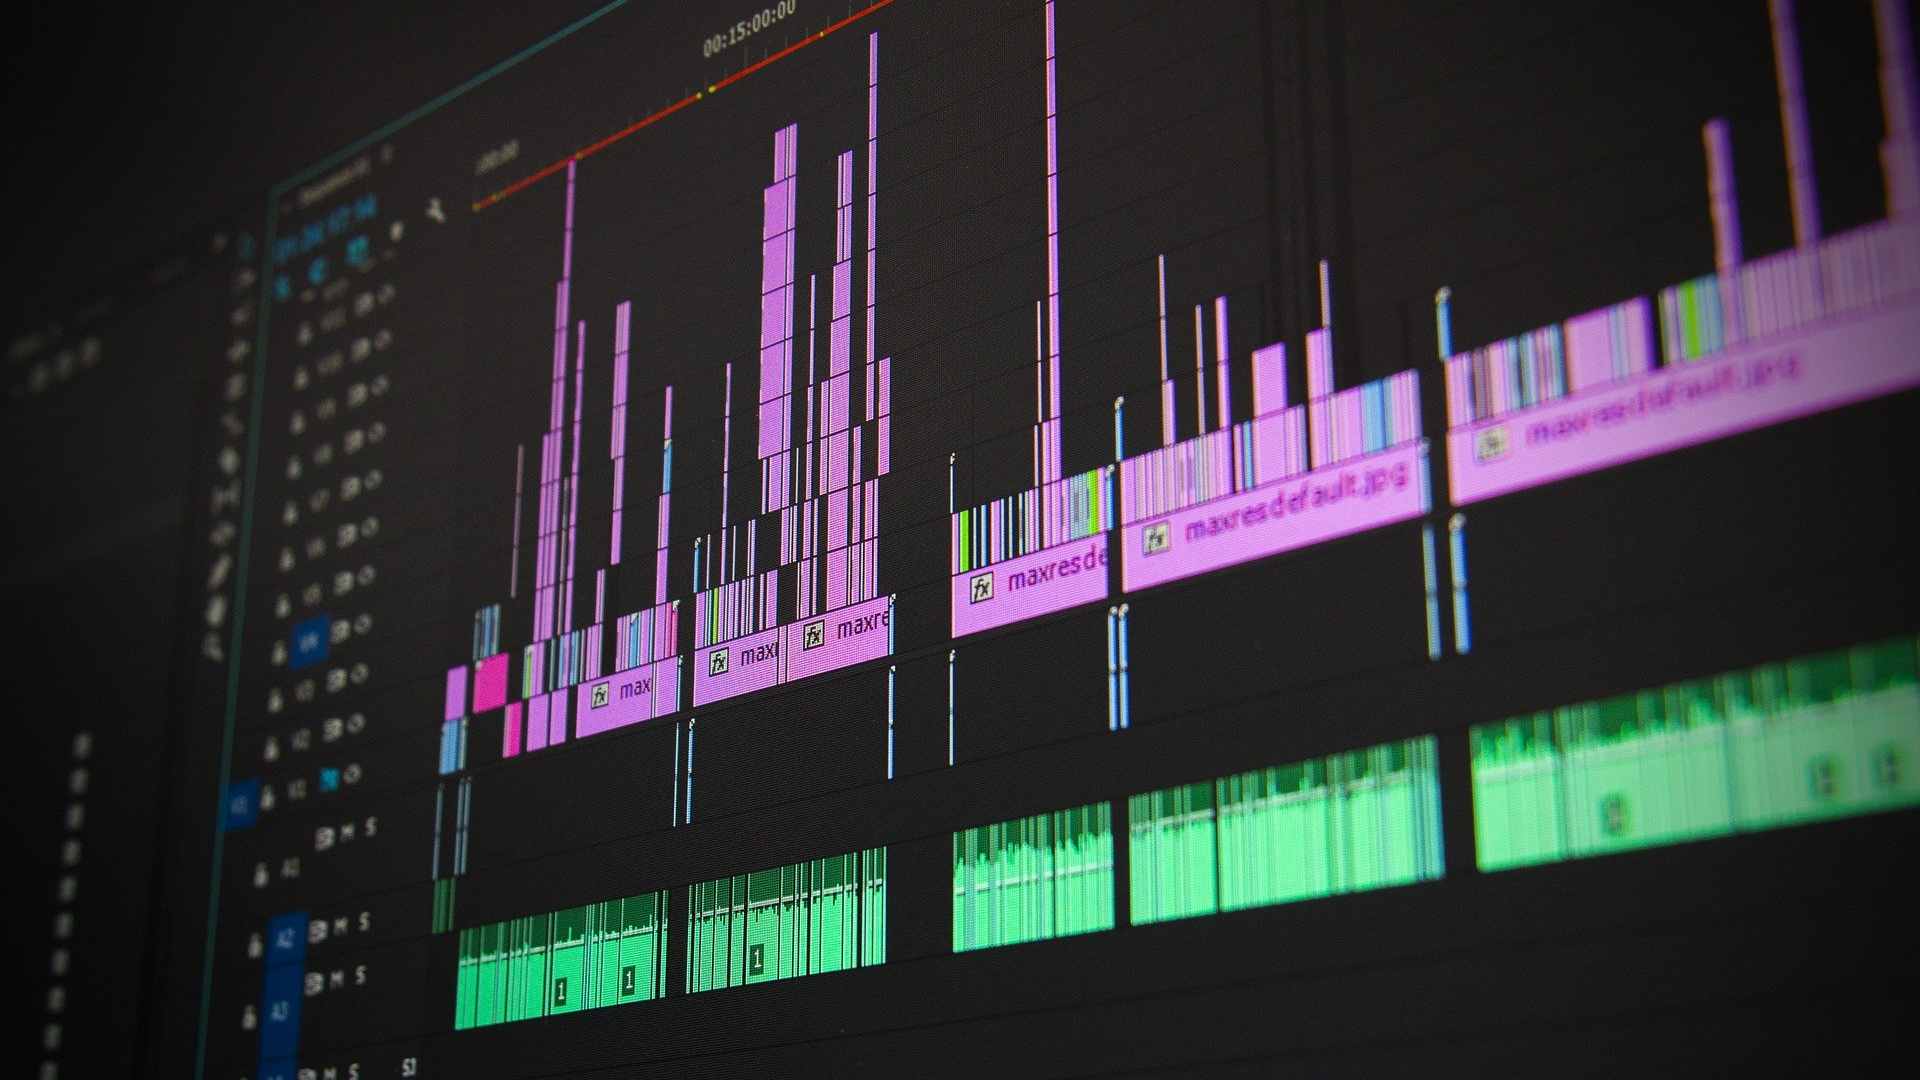 Both Audition and Adobe Premiere Pro now get the Loudness Meter feature. Image: Recklessstudios from Pixabay